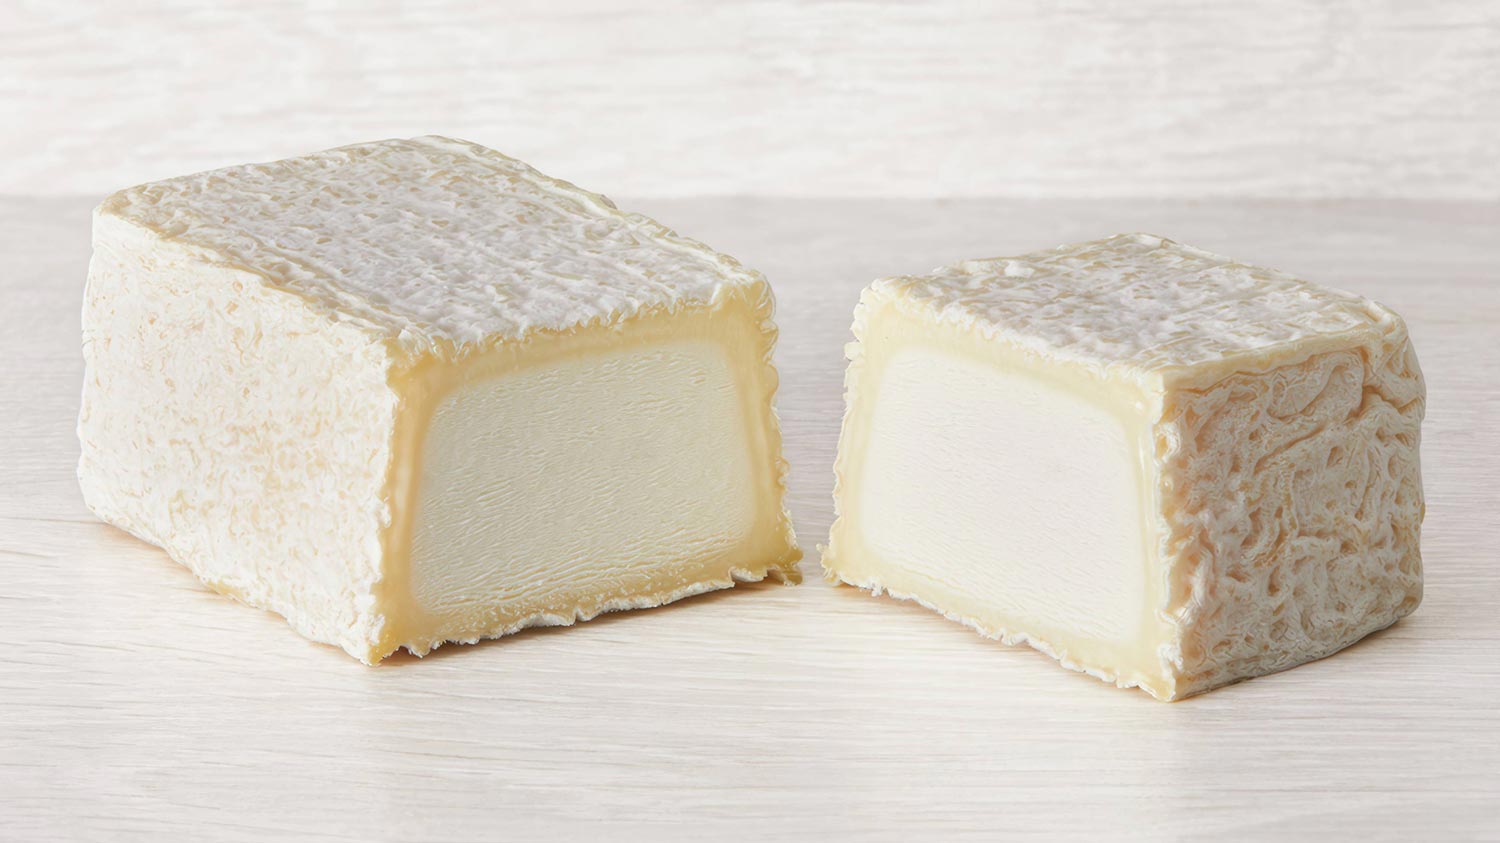 Cheeses_in_Season_Lingot_Des_Causses_Goat_Cheese_from_France_French_Cheese_in_Dubai_Abu_Dhabi_WISK_UAE.jpg